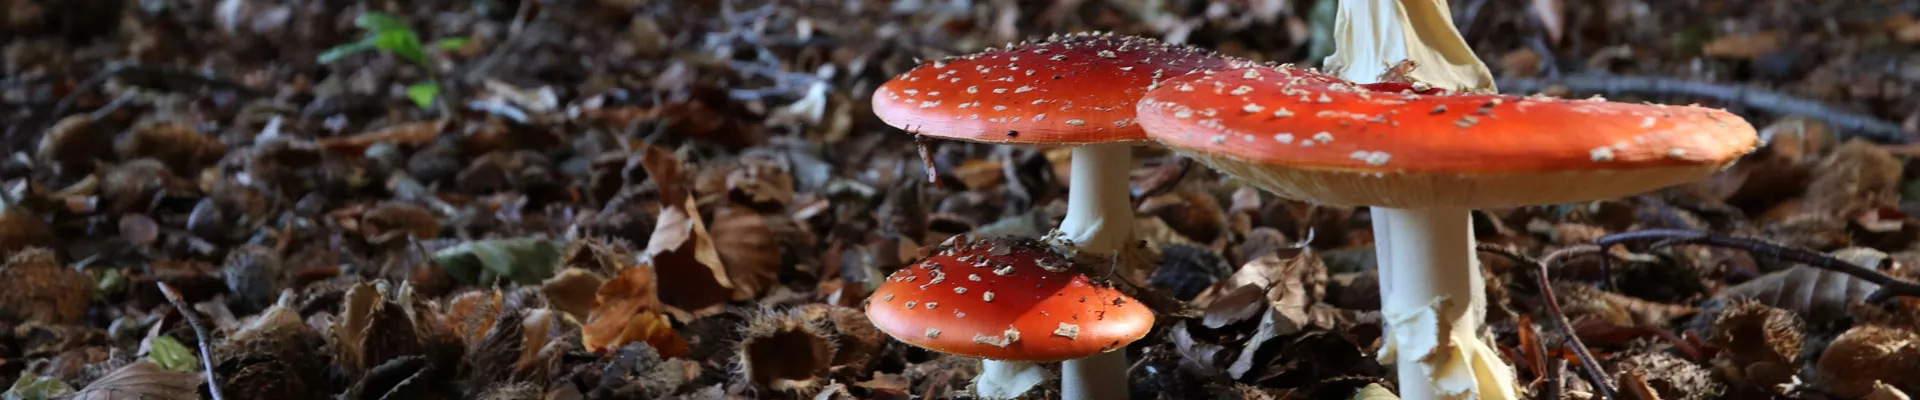 Fungus: kingdom of the fluffies